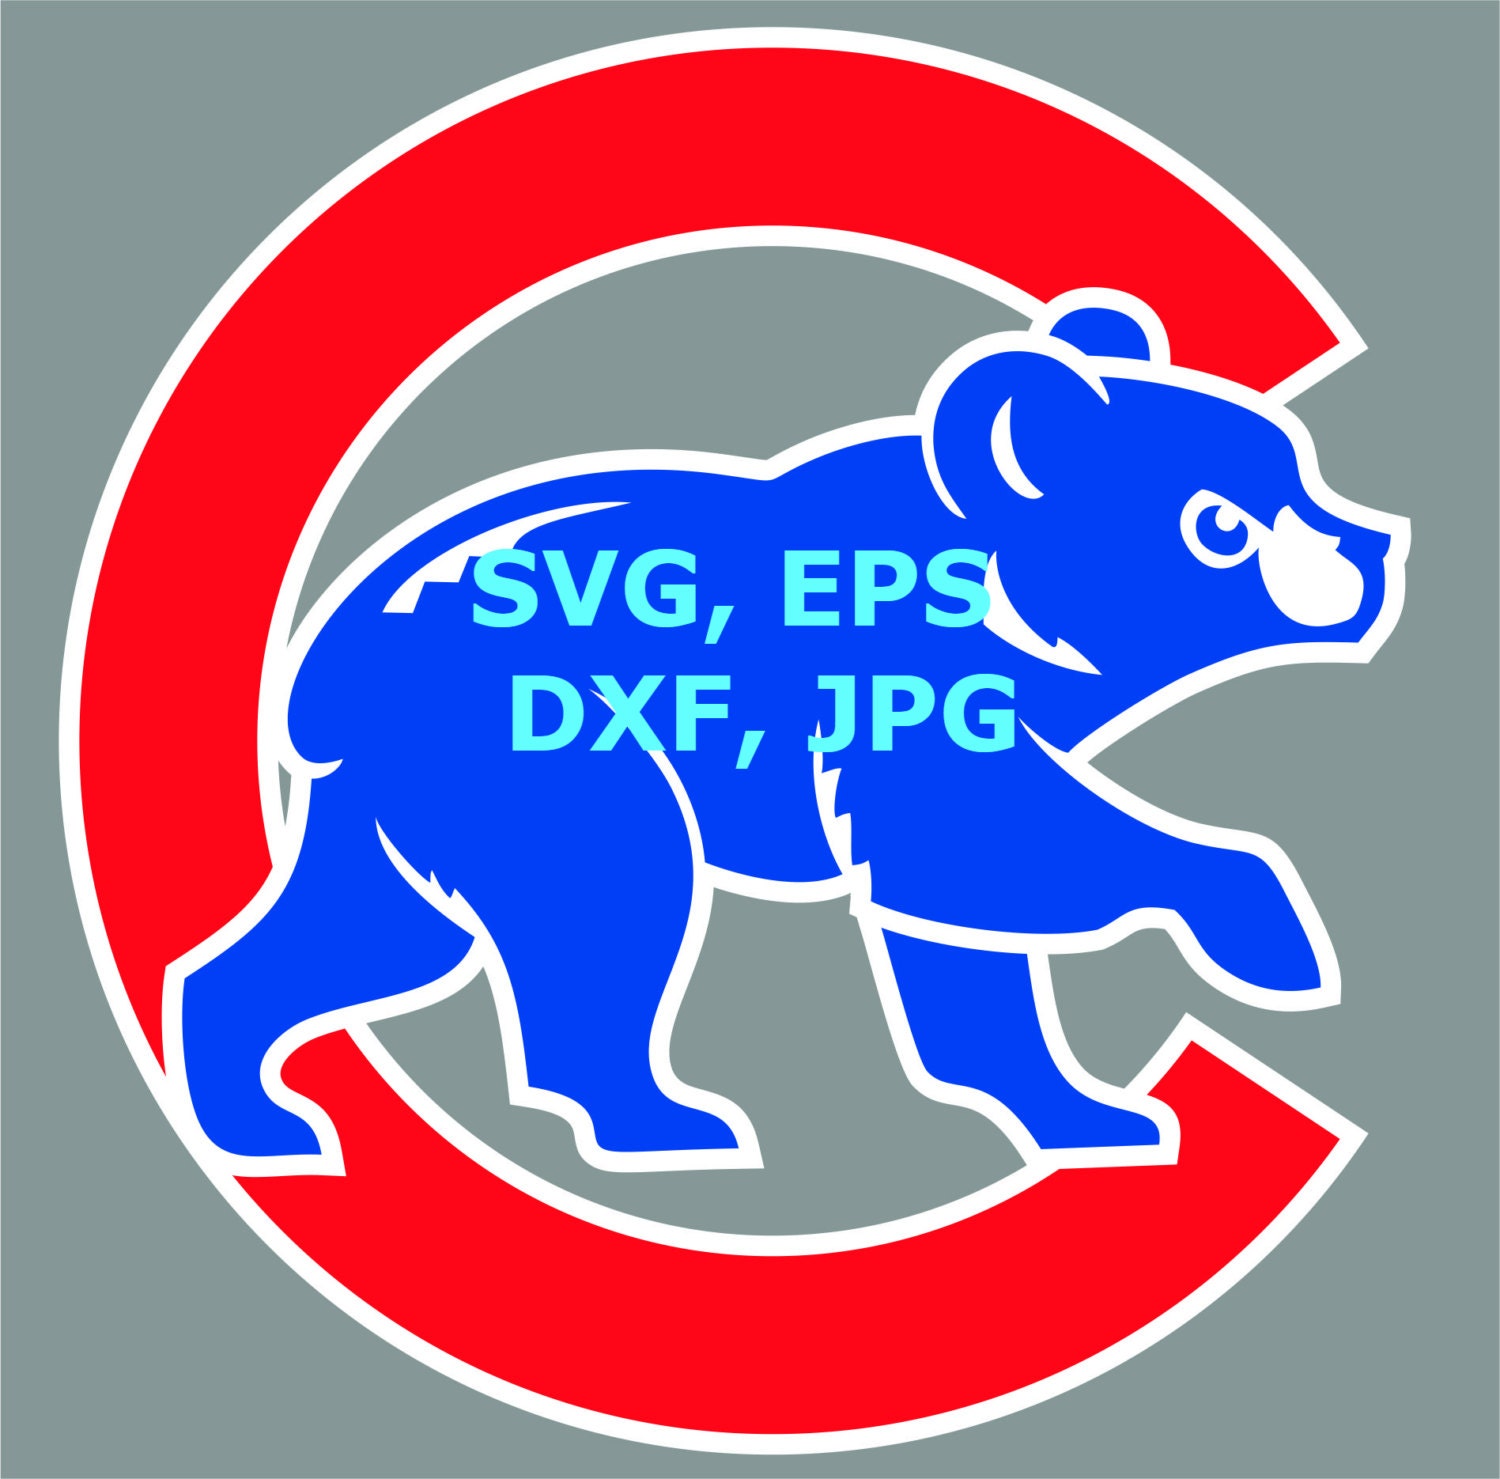 Free Cubs Svg Files - Chicago cubs svg Etsy : You can copy, modify, distr.....